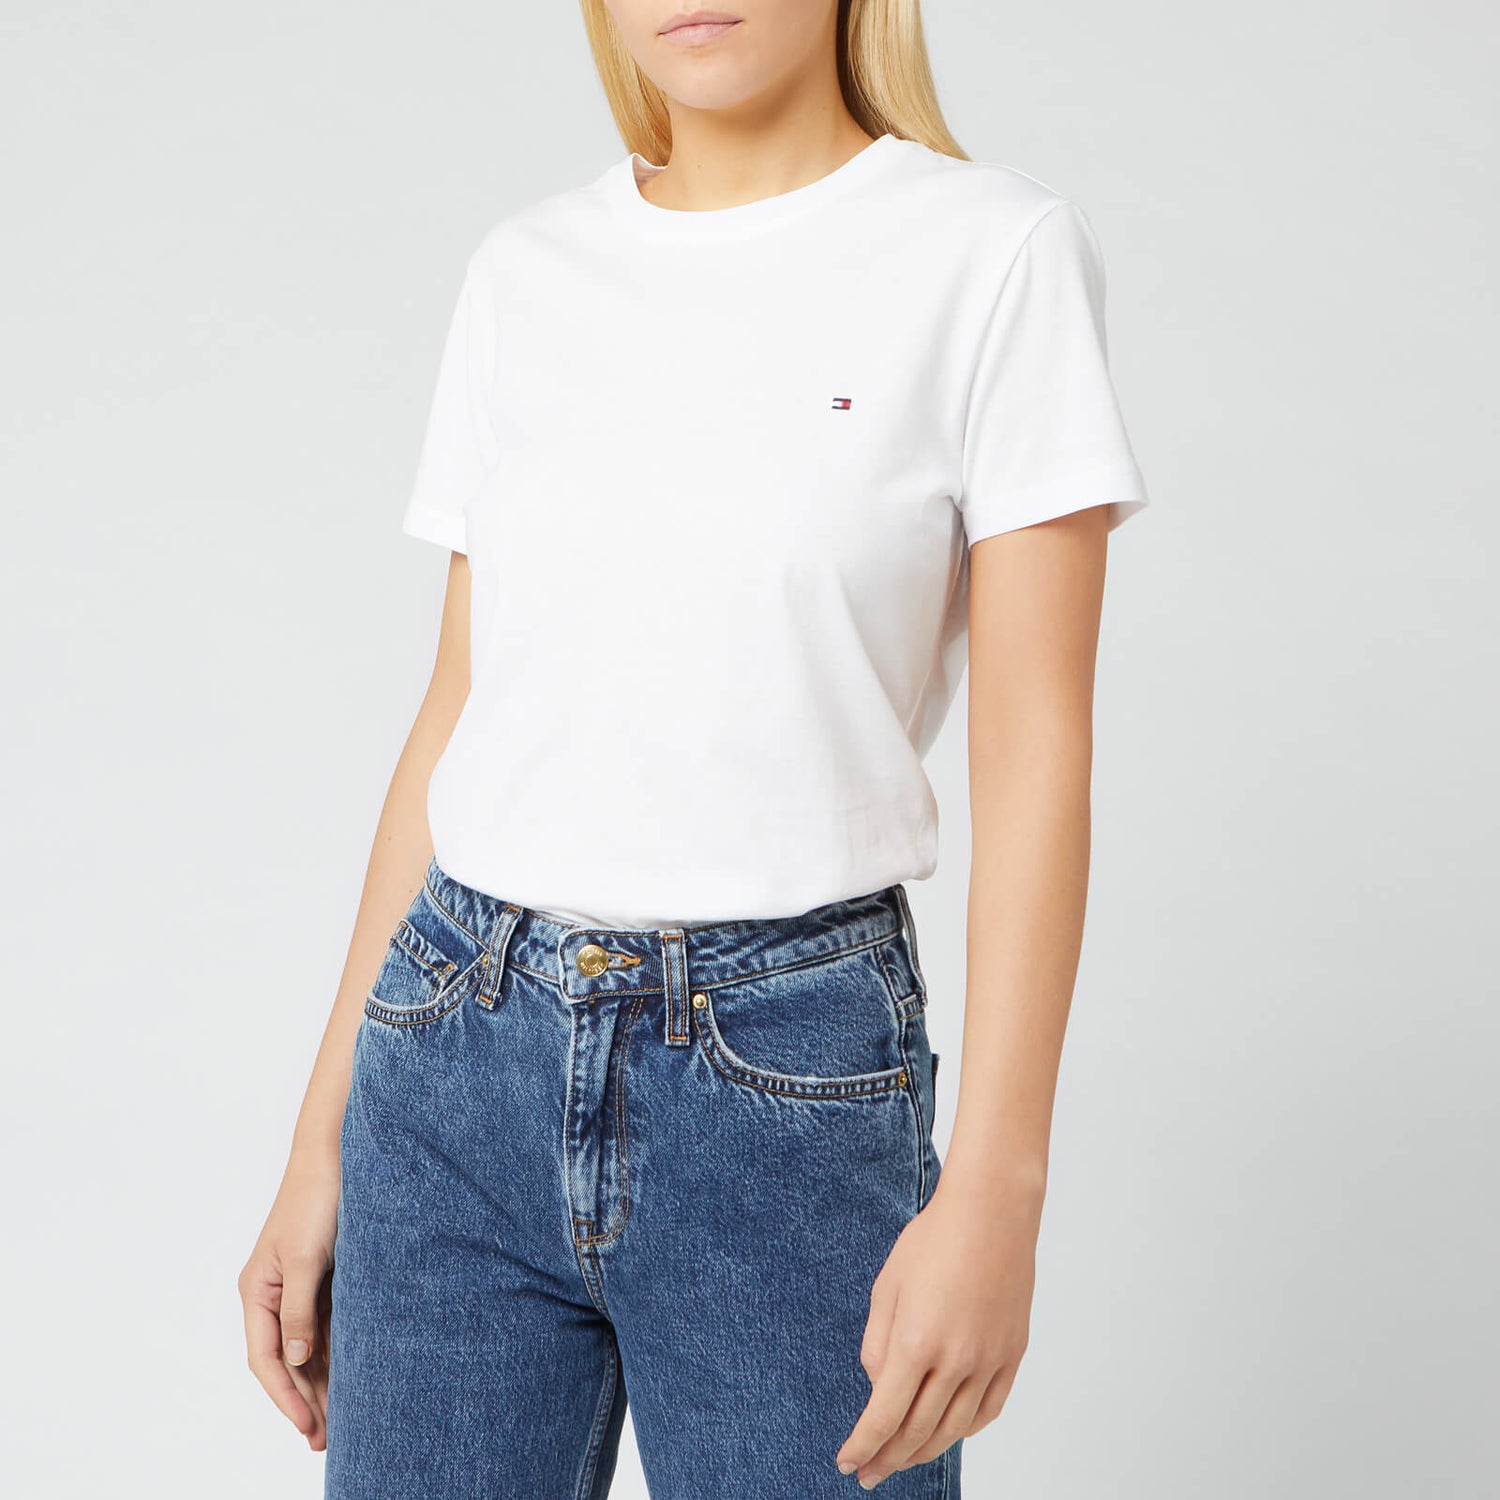 Tommy Hilfiger Women's Heritage Crew Neck T-Shirt - Classic White - S